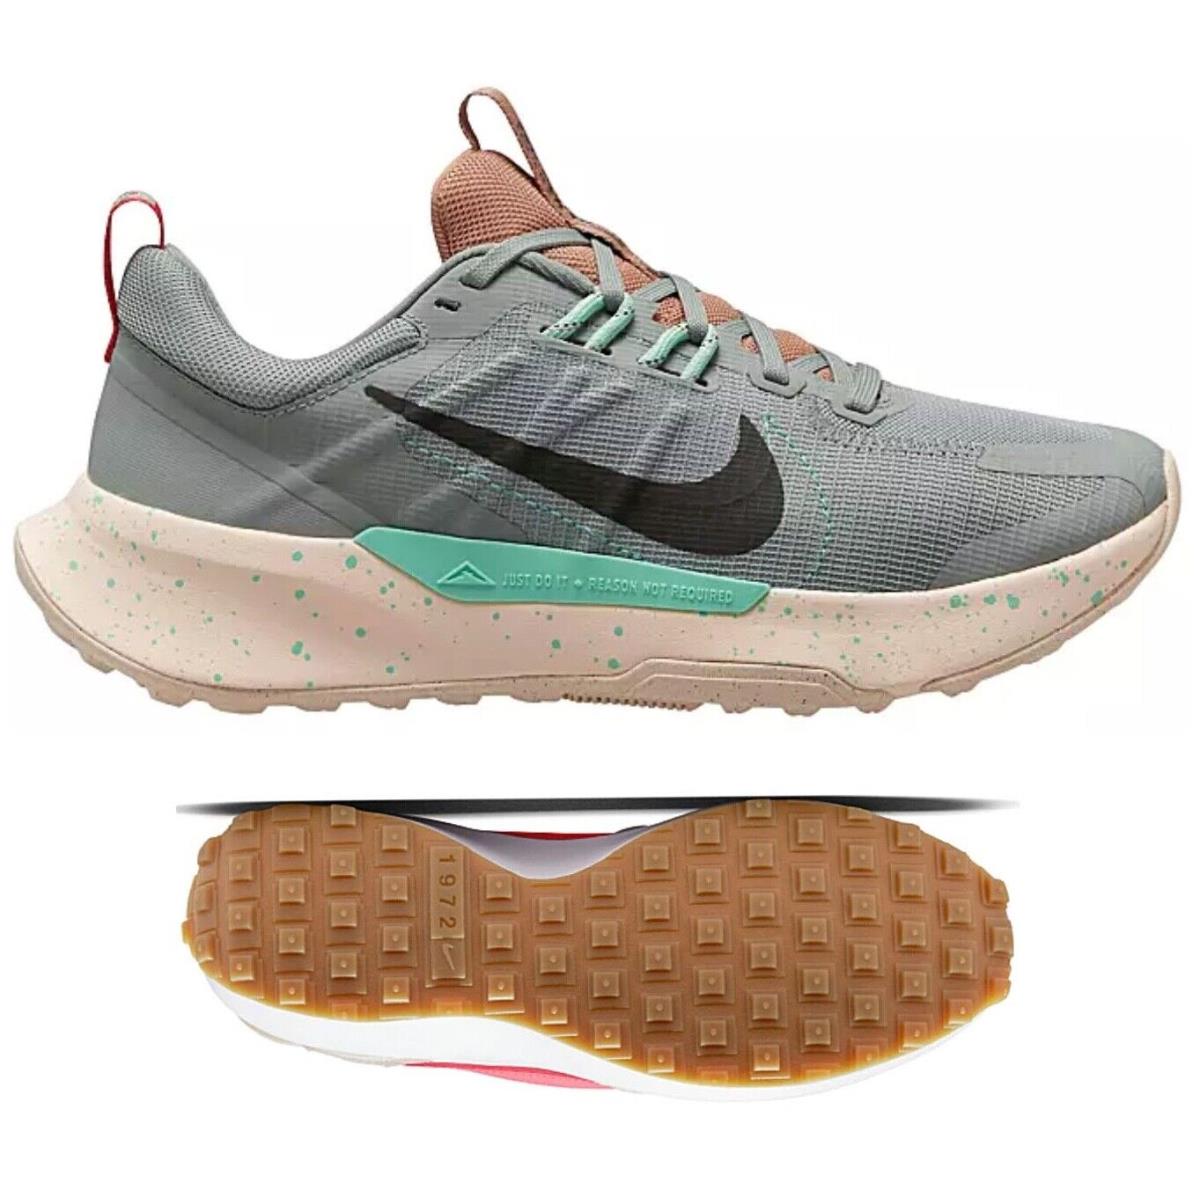 Nike Juniper Athletic Sneakers Trail Shoes Casual Women`s Gray Mint 6 - 10